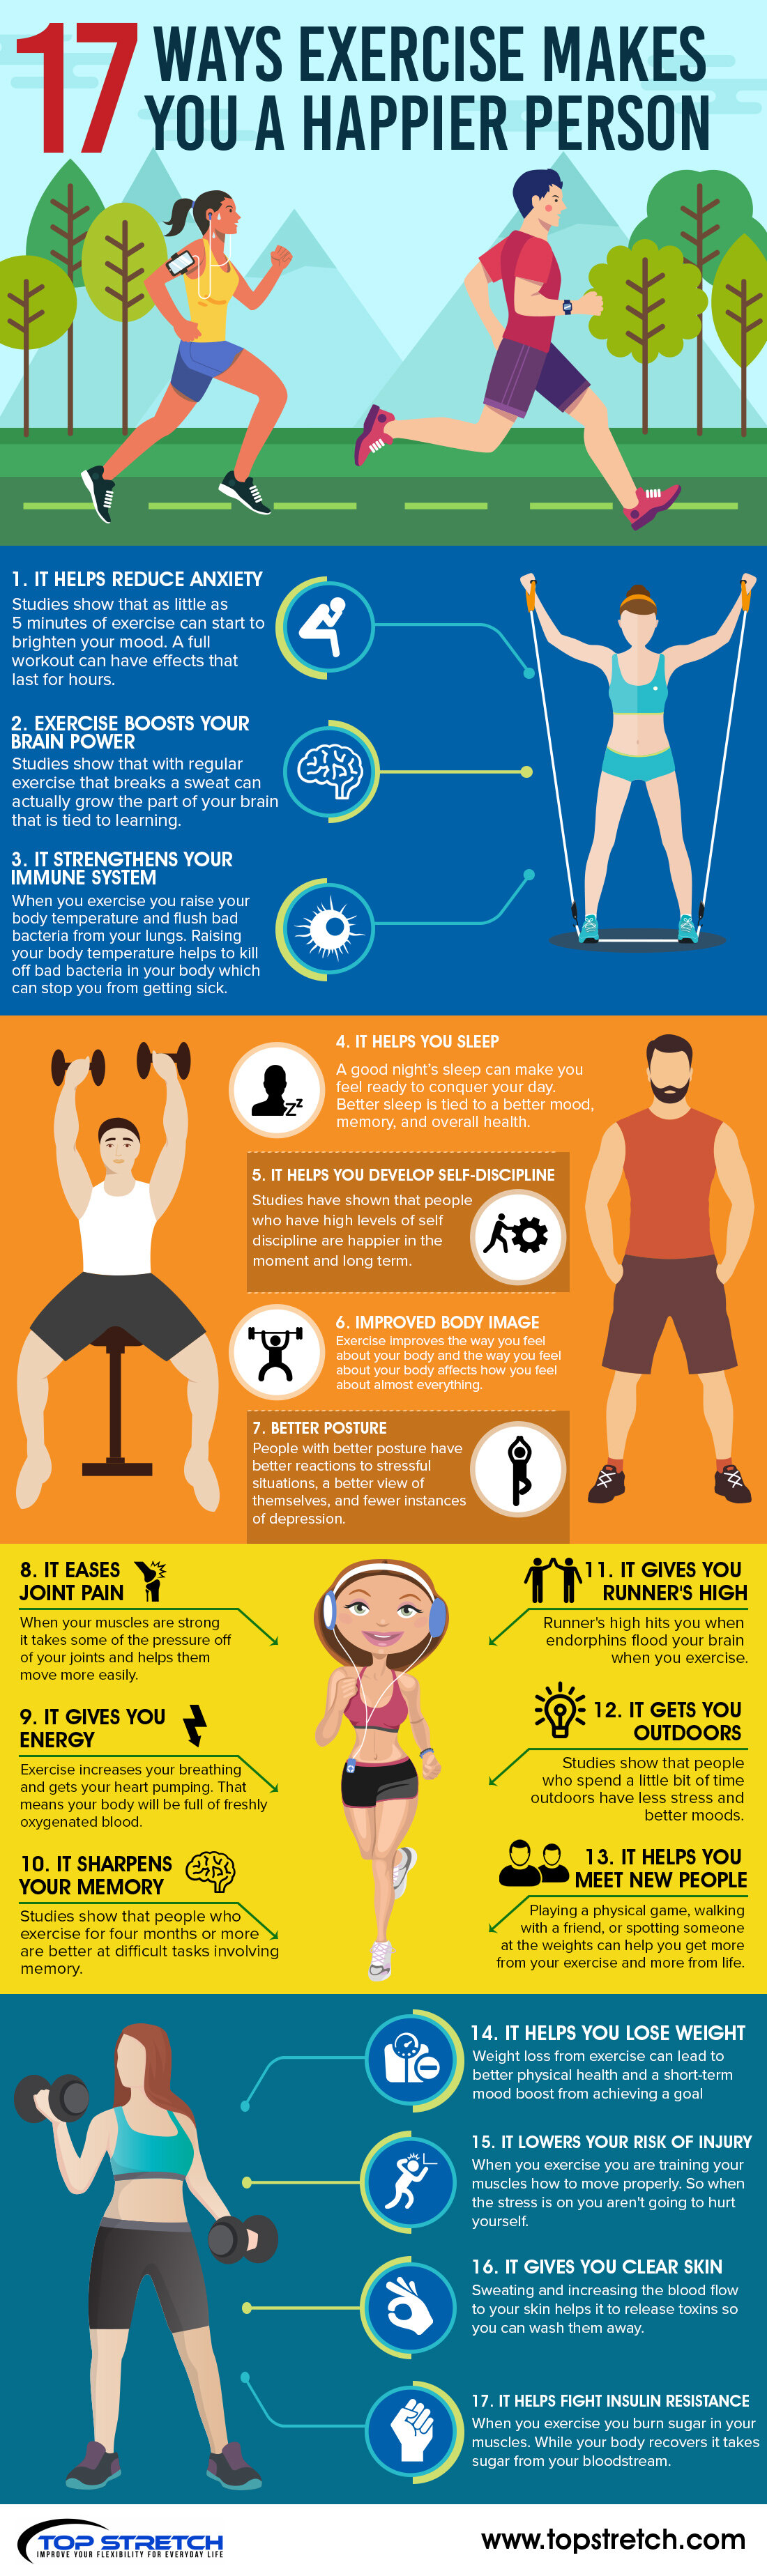 Positive-Effects-Of-Exercising-Infographic.jpg